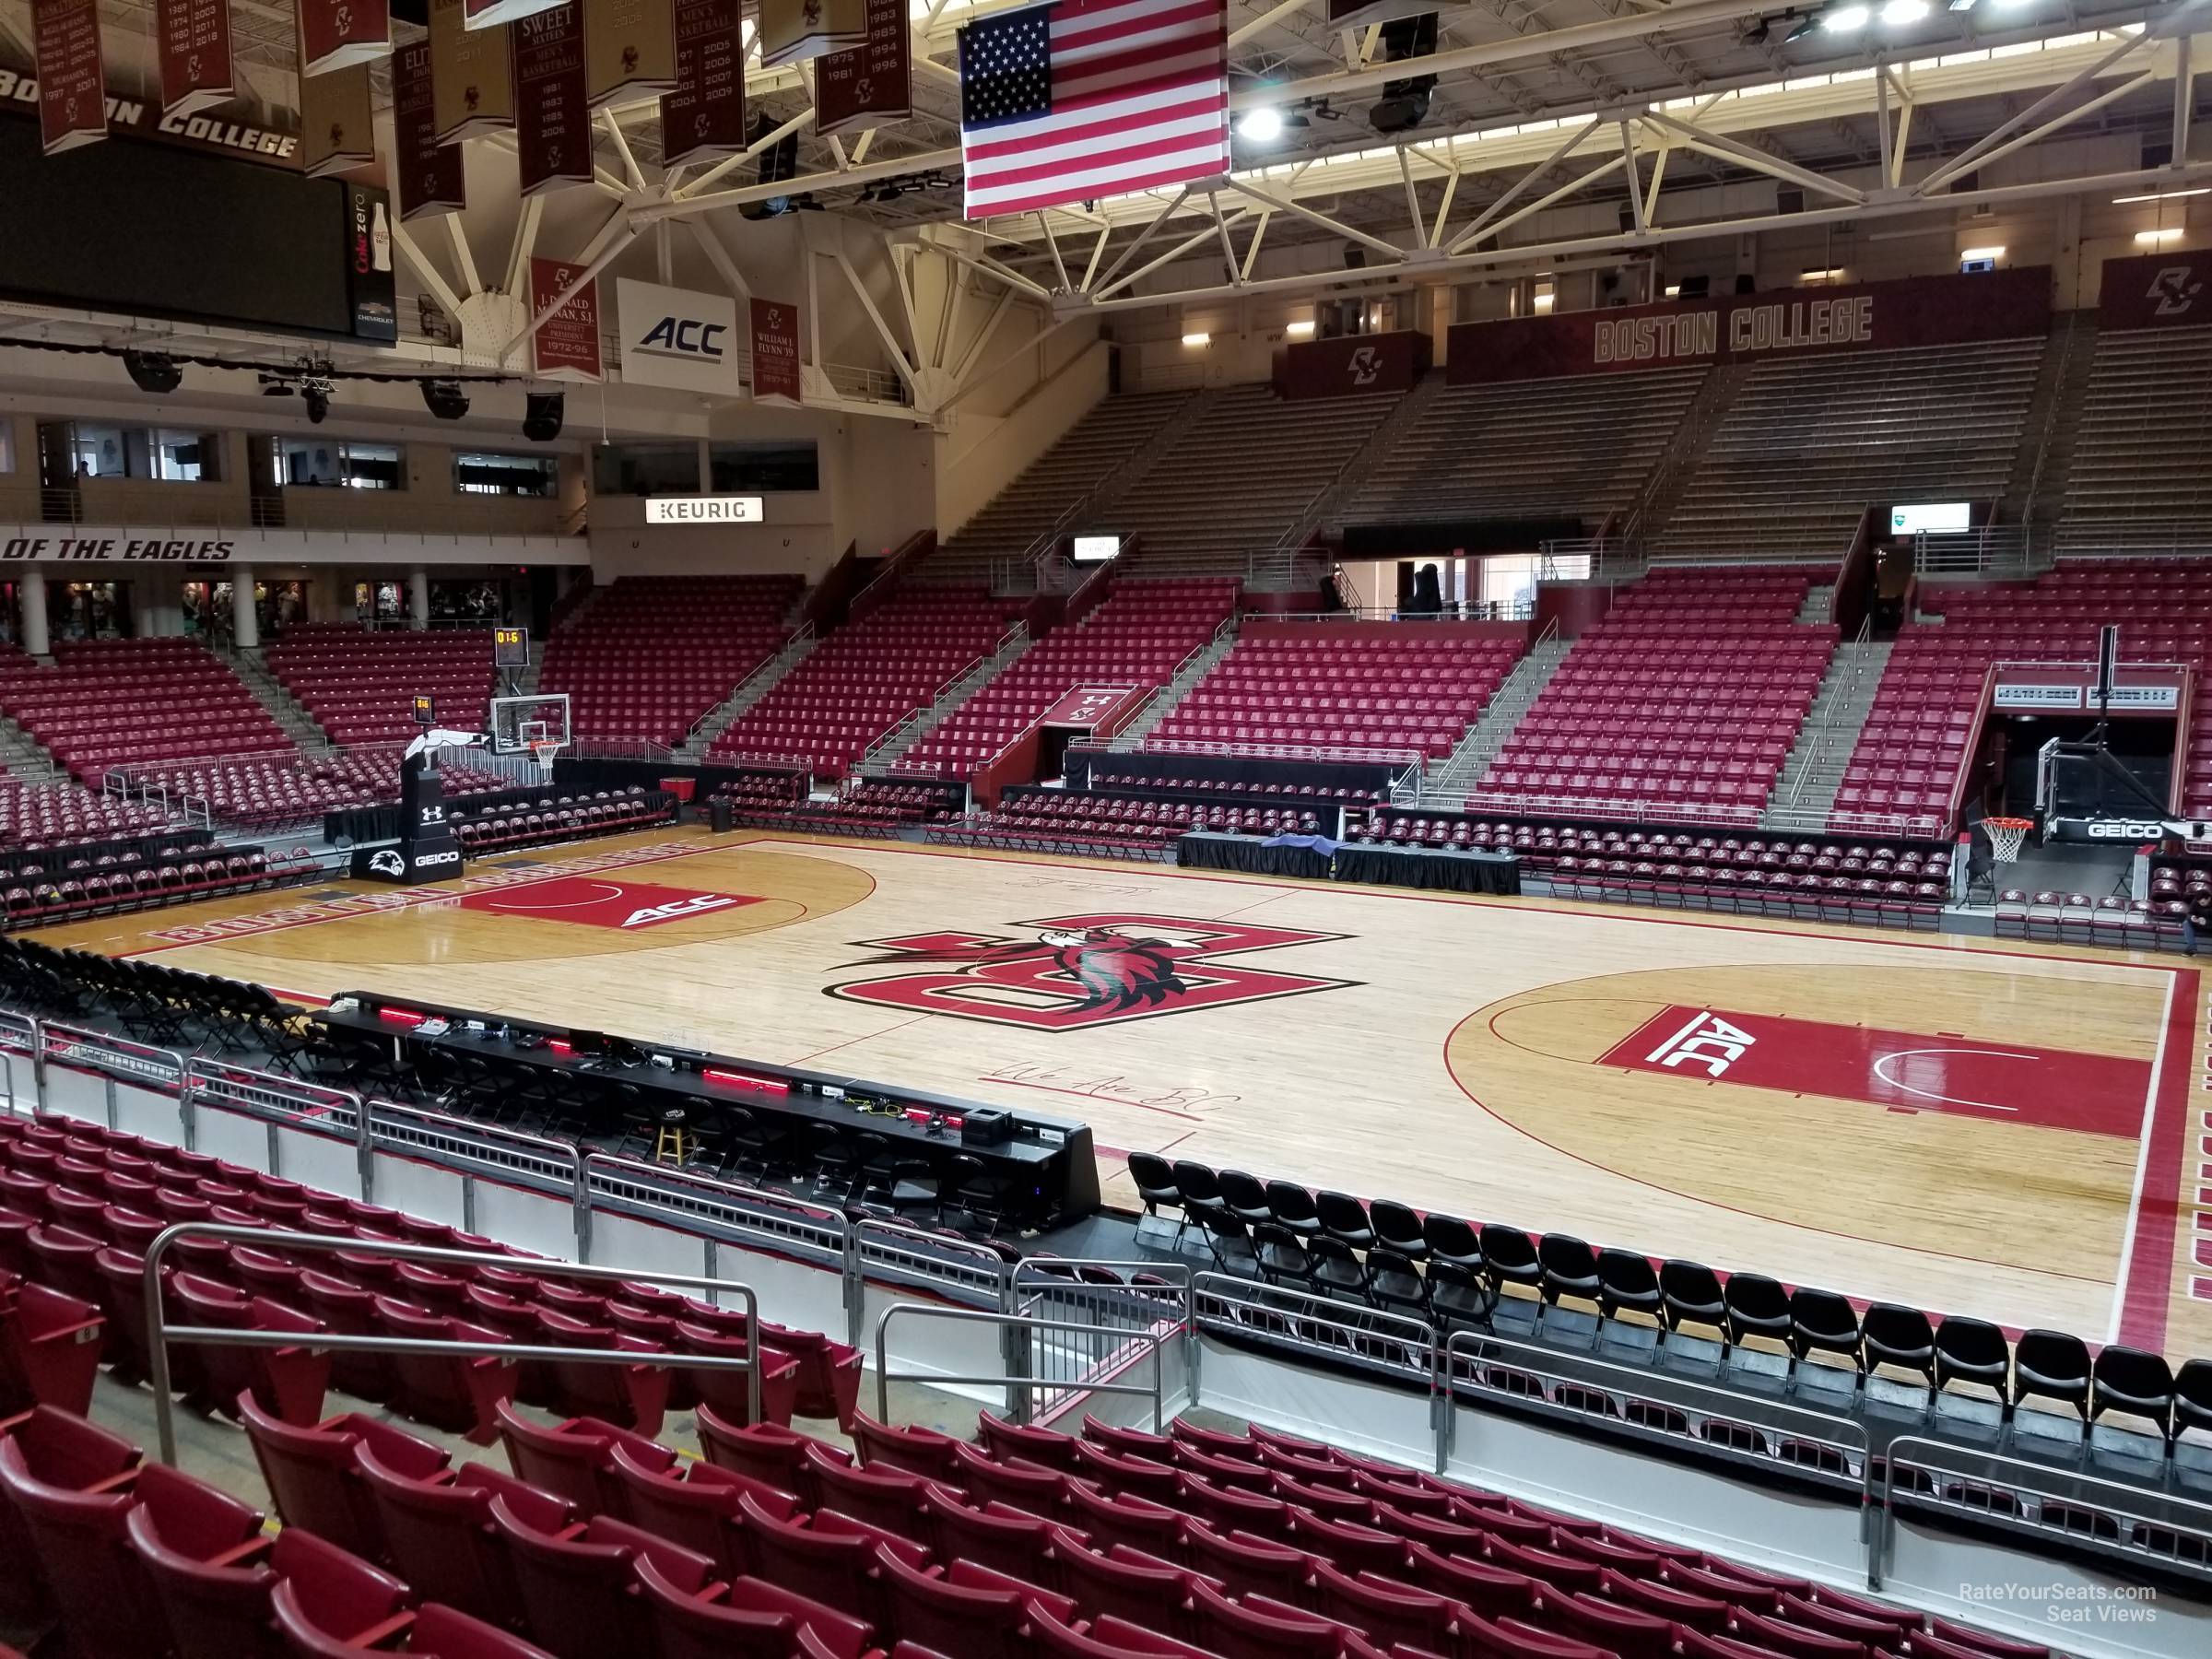 section k, row 12 seat view  - conte forum